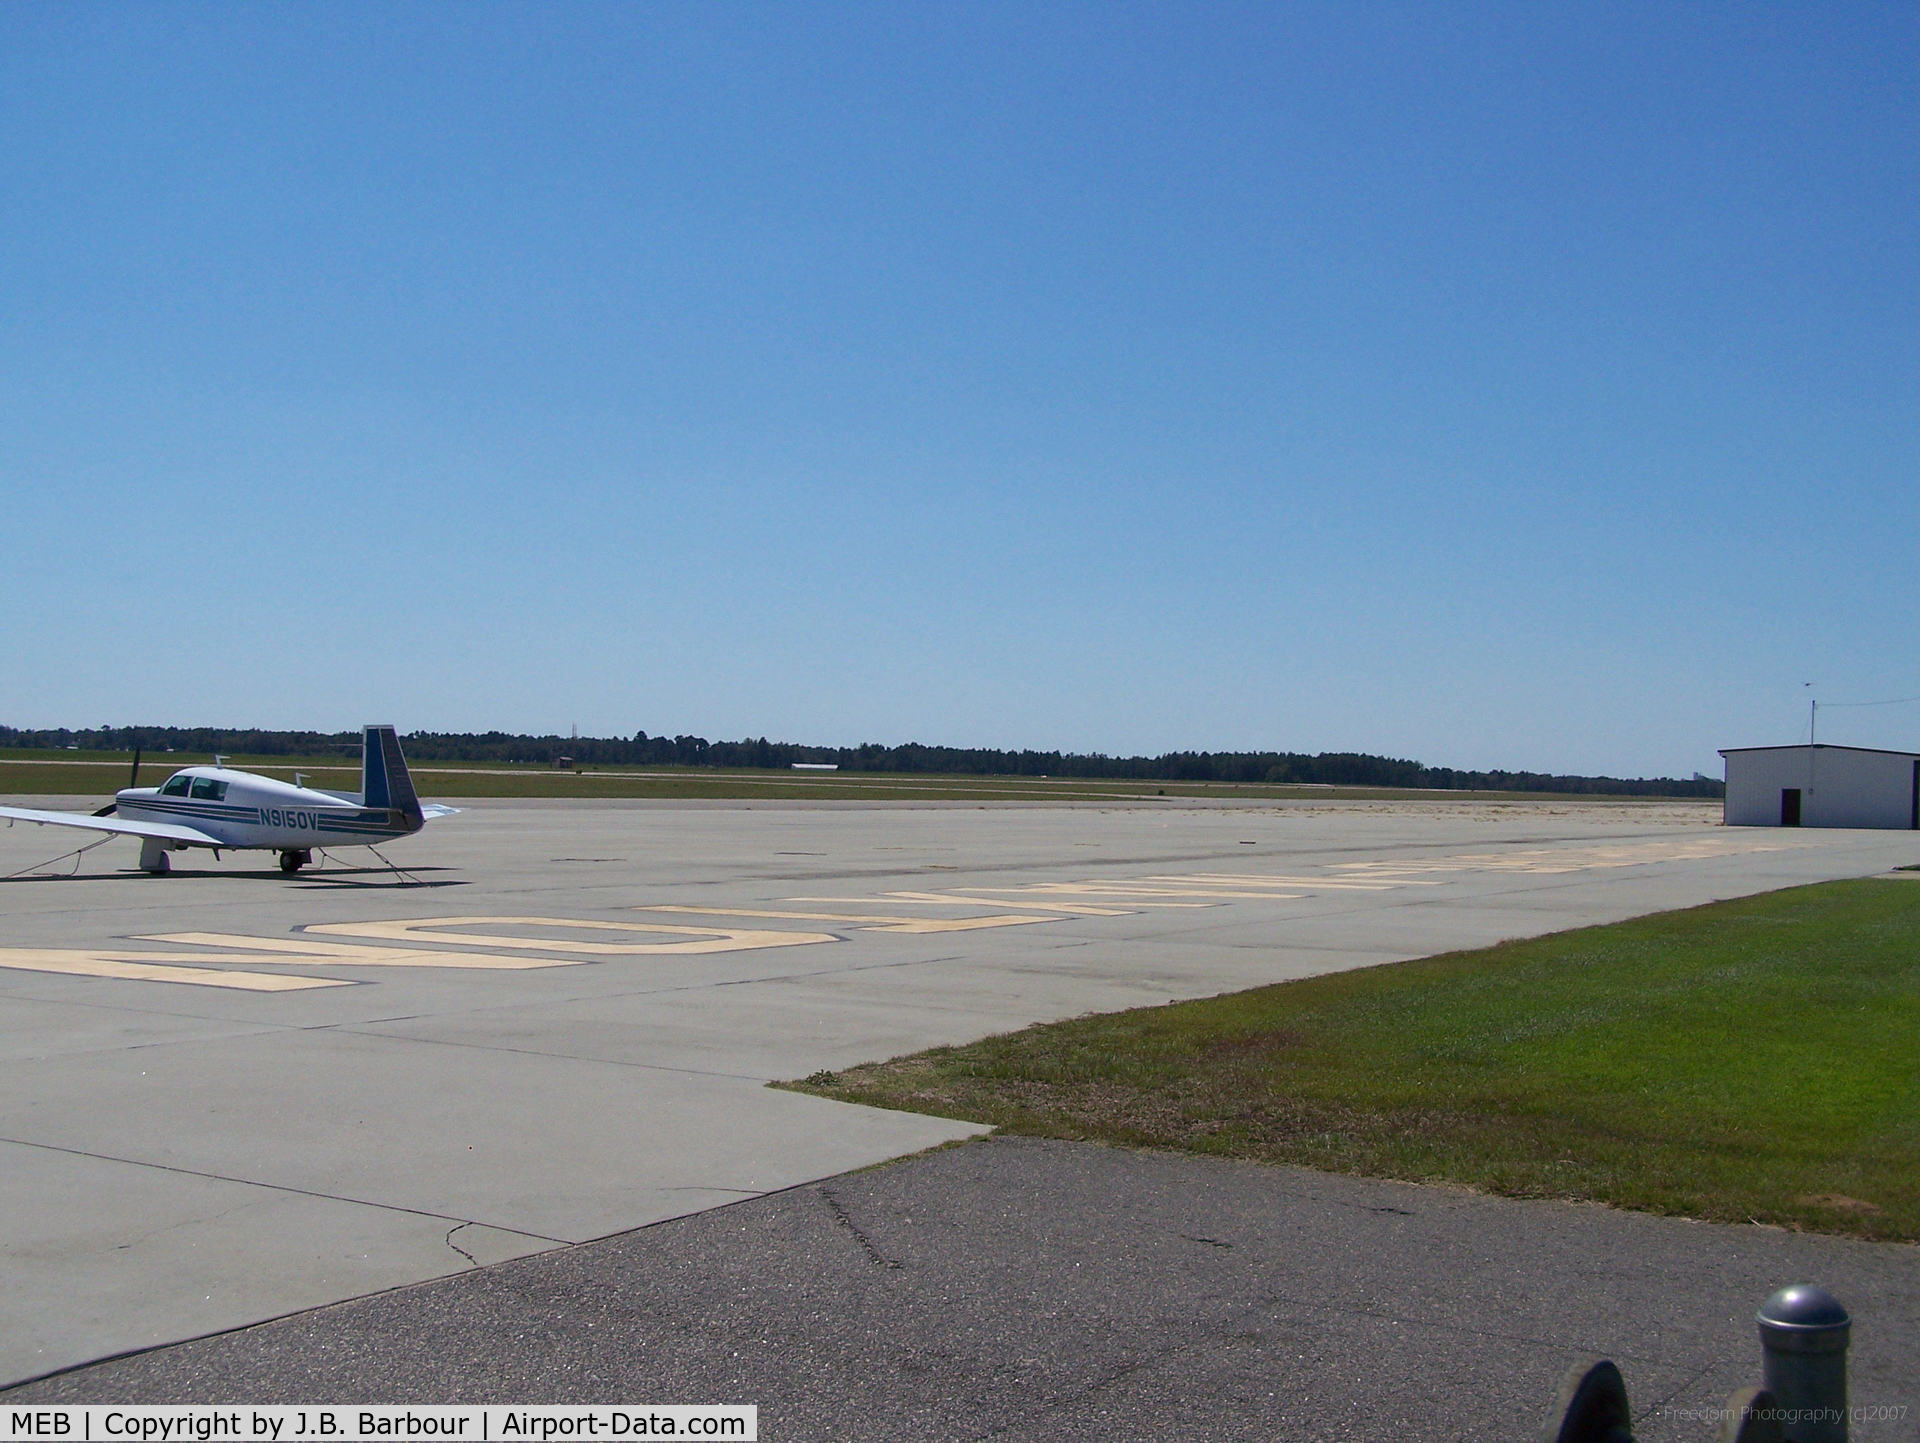 Laurinburg-maxton Airport (MEB) - All alone!